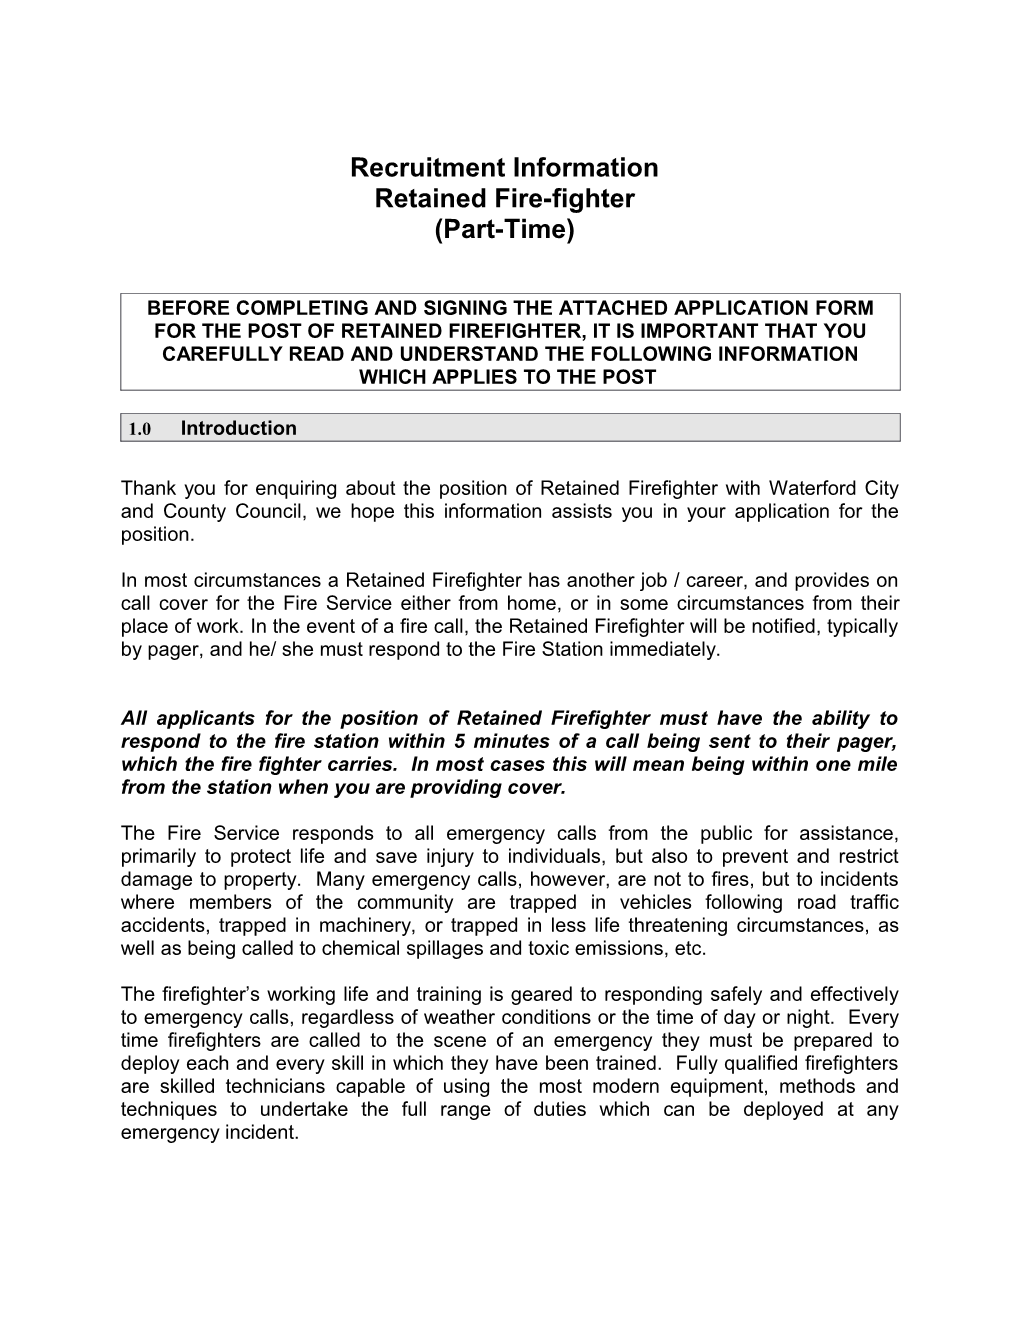 Recruitment Information Retained Fire